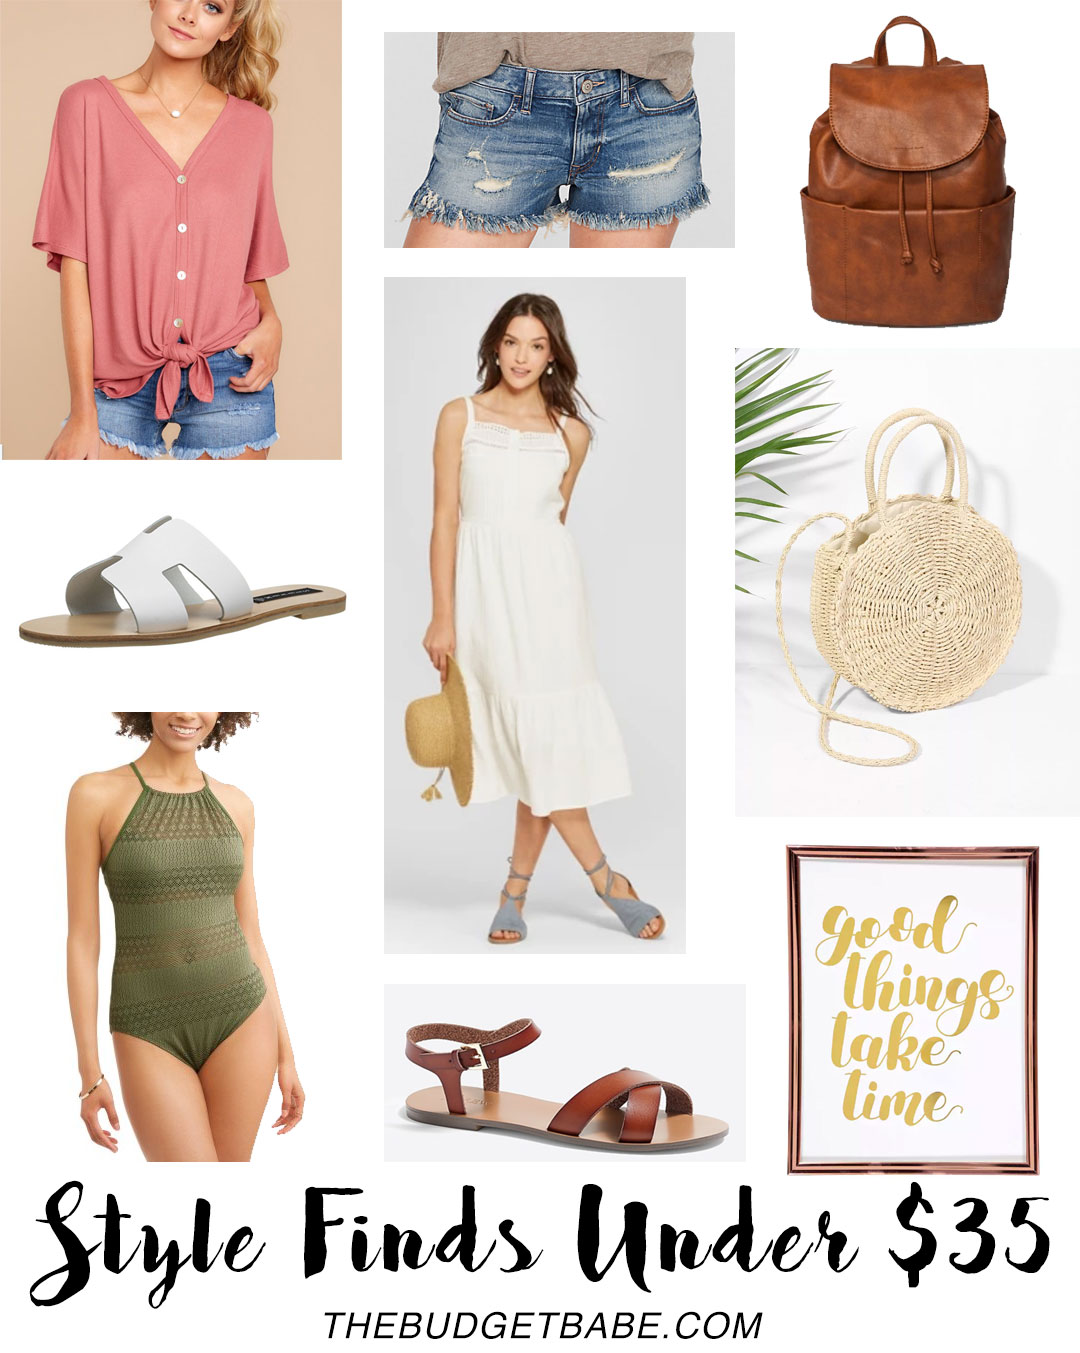 Style Finds Under $35 on The Budget Babe fashion blog